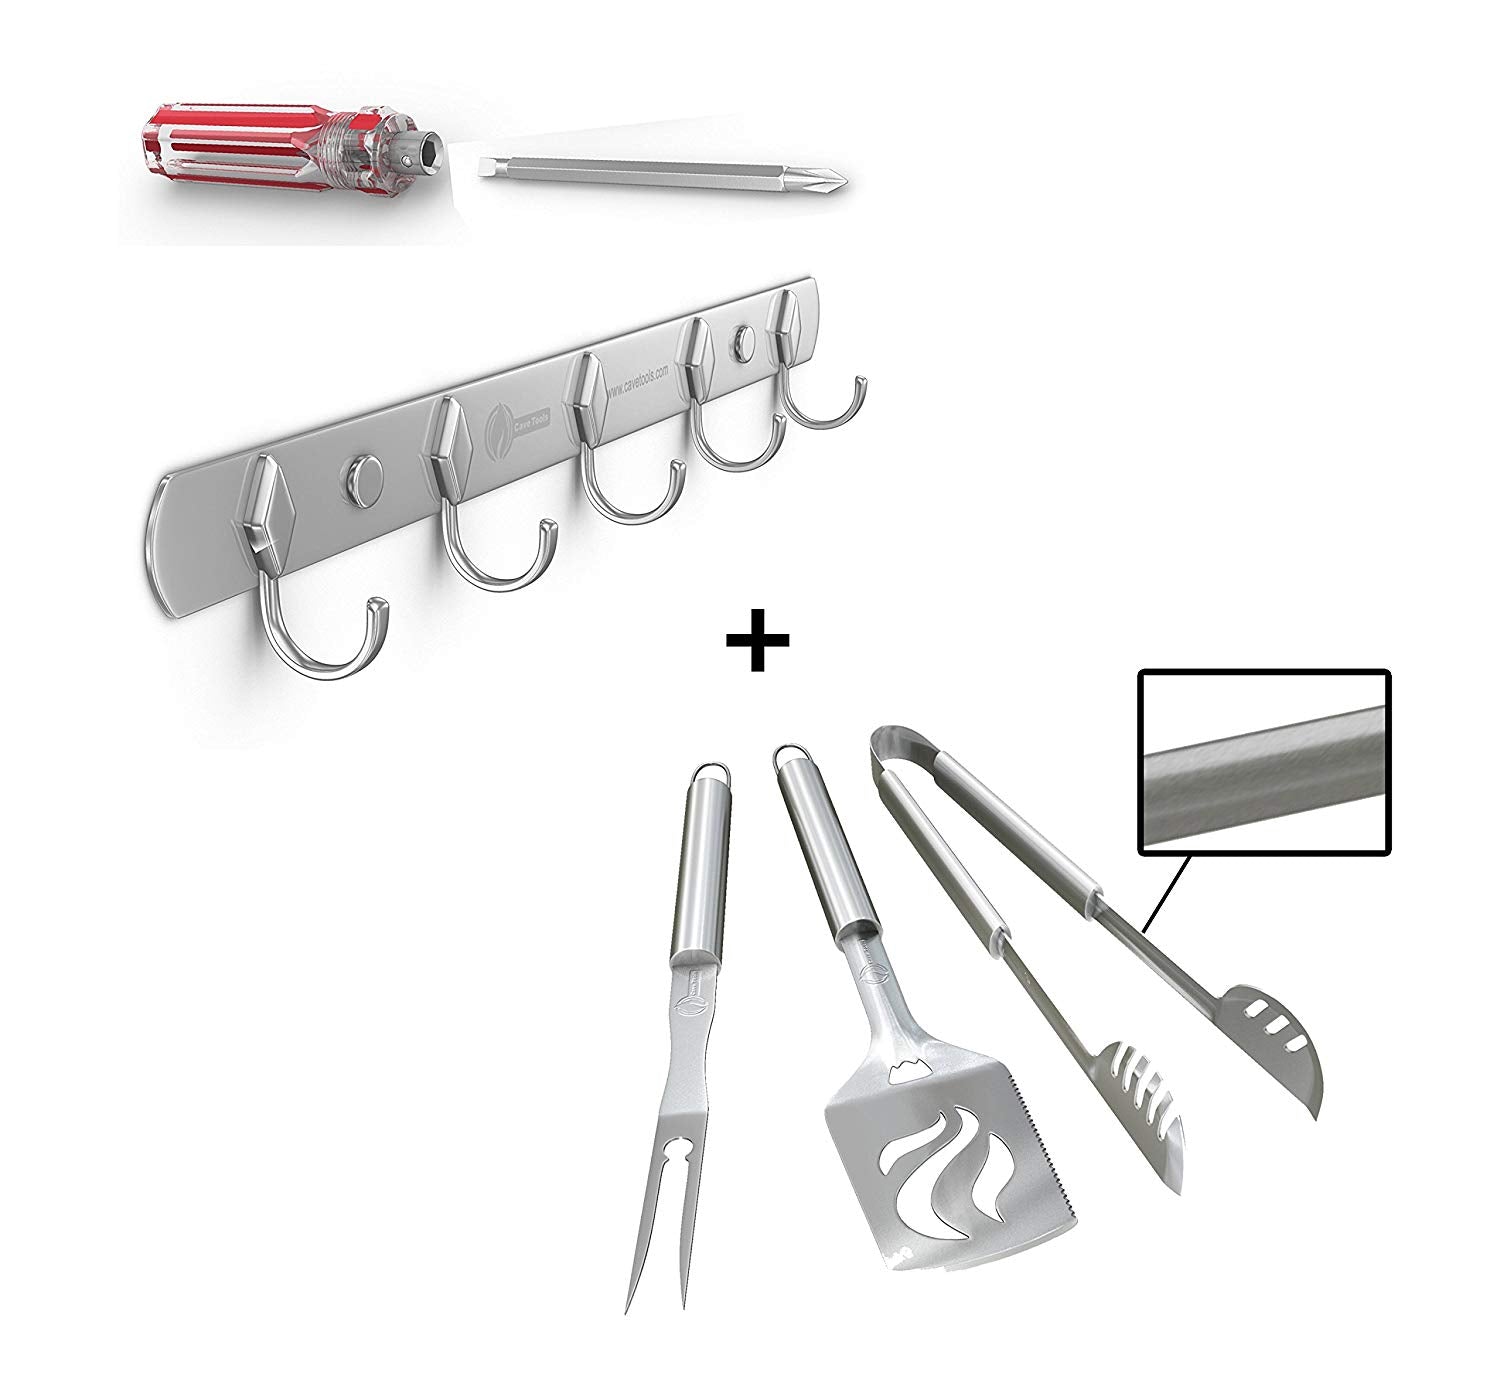 Hook Rack for BBQ Utensils + Grill Tools Set - HEAVY DUTY 20% THICKER STAINLESS STEEL - Professional Barbecue Accessories - 3 Piece Kit Includes Spatula Tongs & Fork -Birthday Gift Idea For Dad